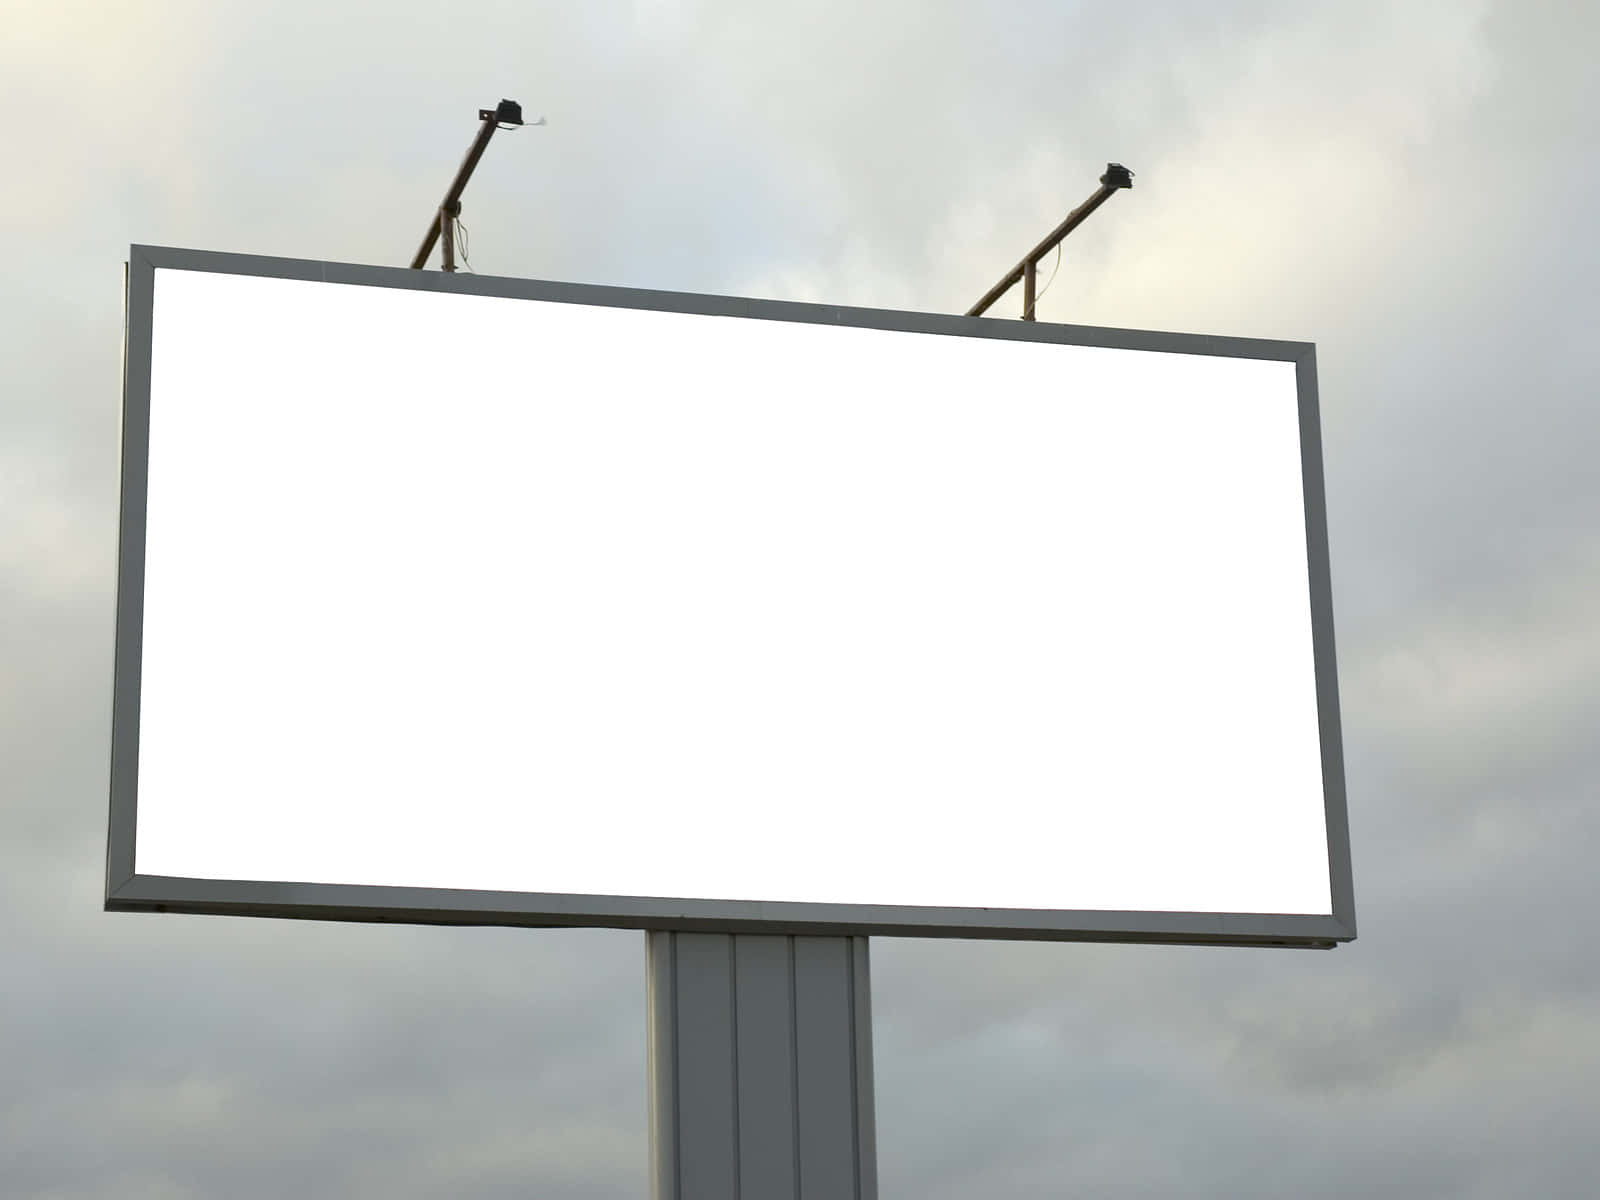 A Large Billboard With A Blank Screen